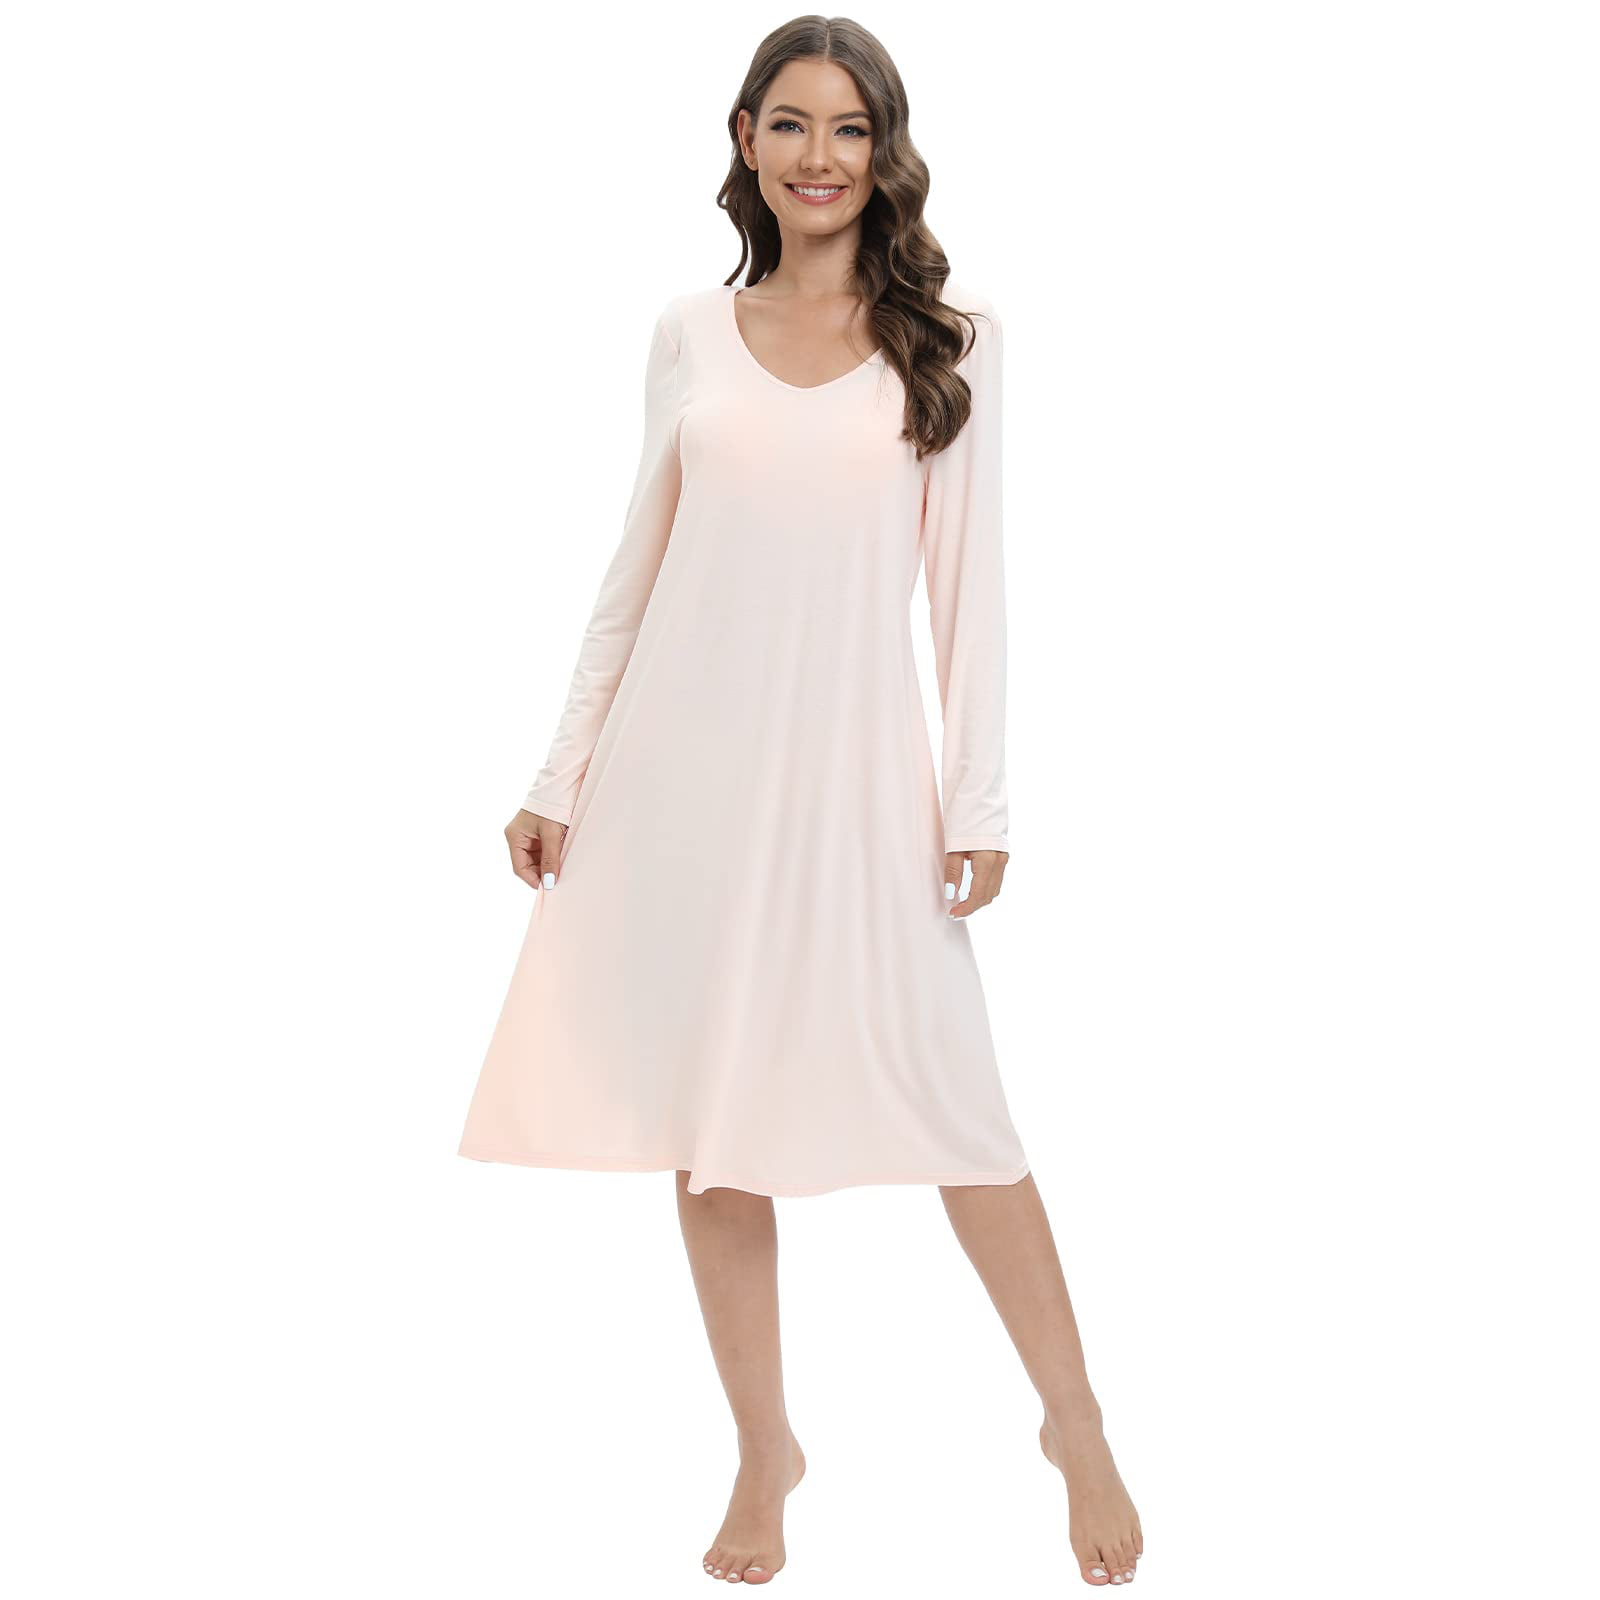 Women's Nightgowns with Built in Bra Removable Pads Nightshirt Dress  Sleepwear Long Sleeve Cotton Nightdress 